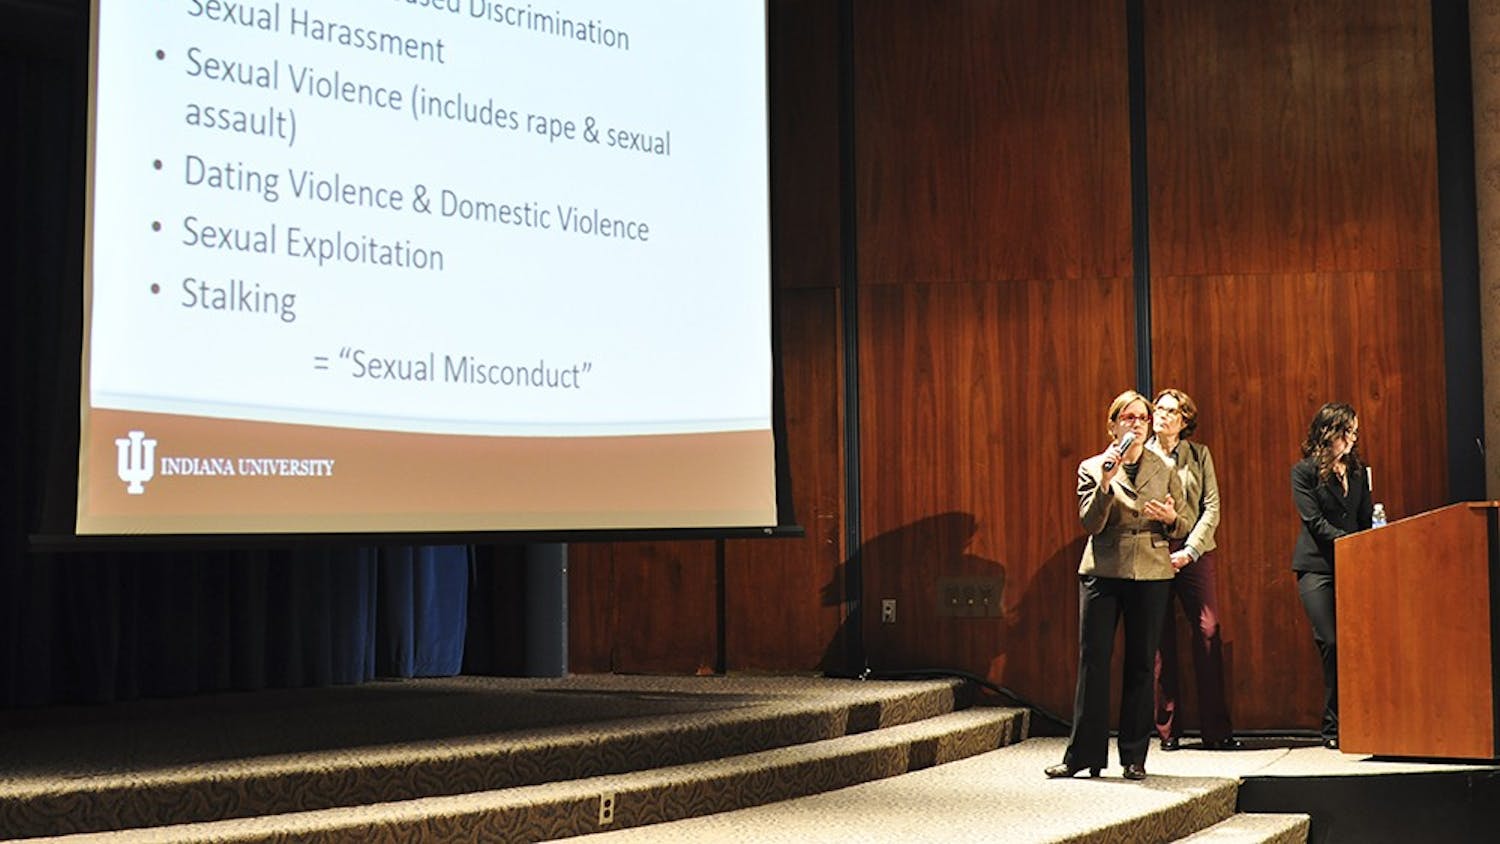 IMU Whittenberger Auditorium holds a meeting on sexual misconduc